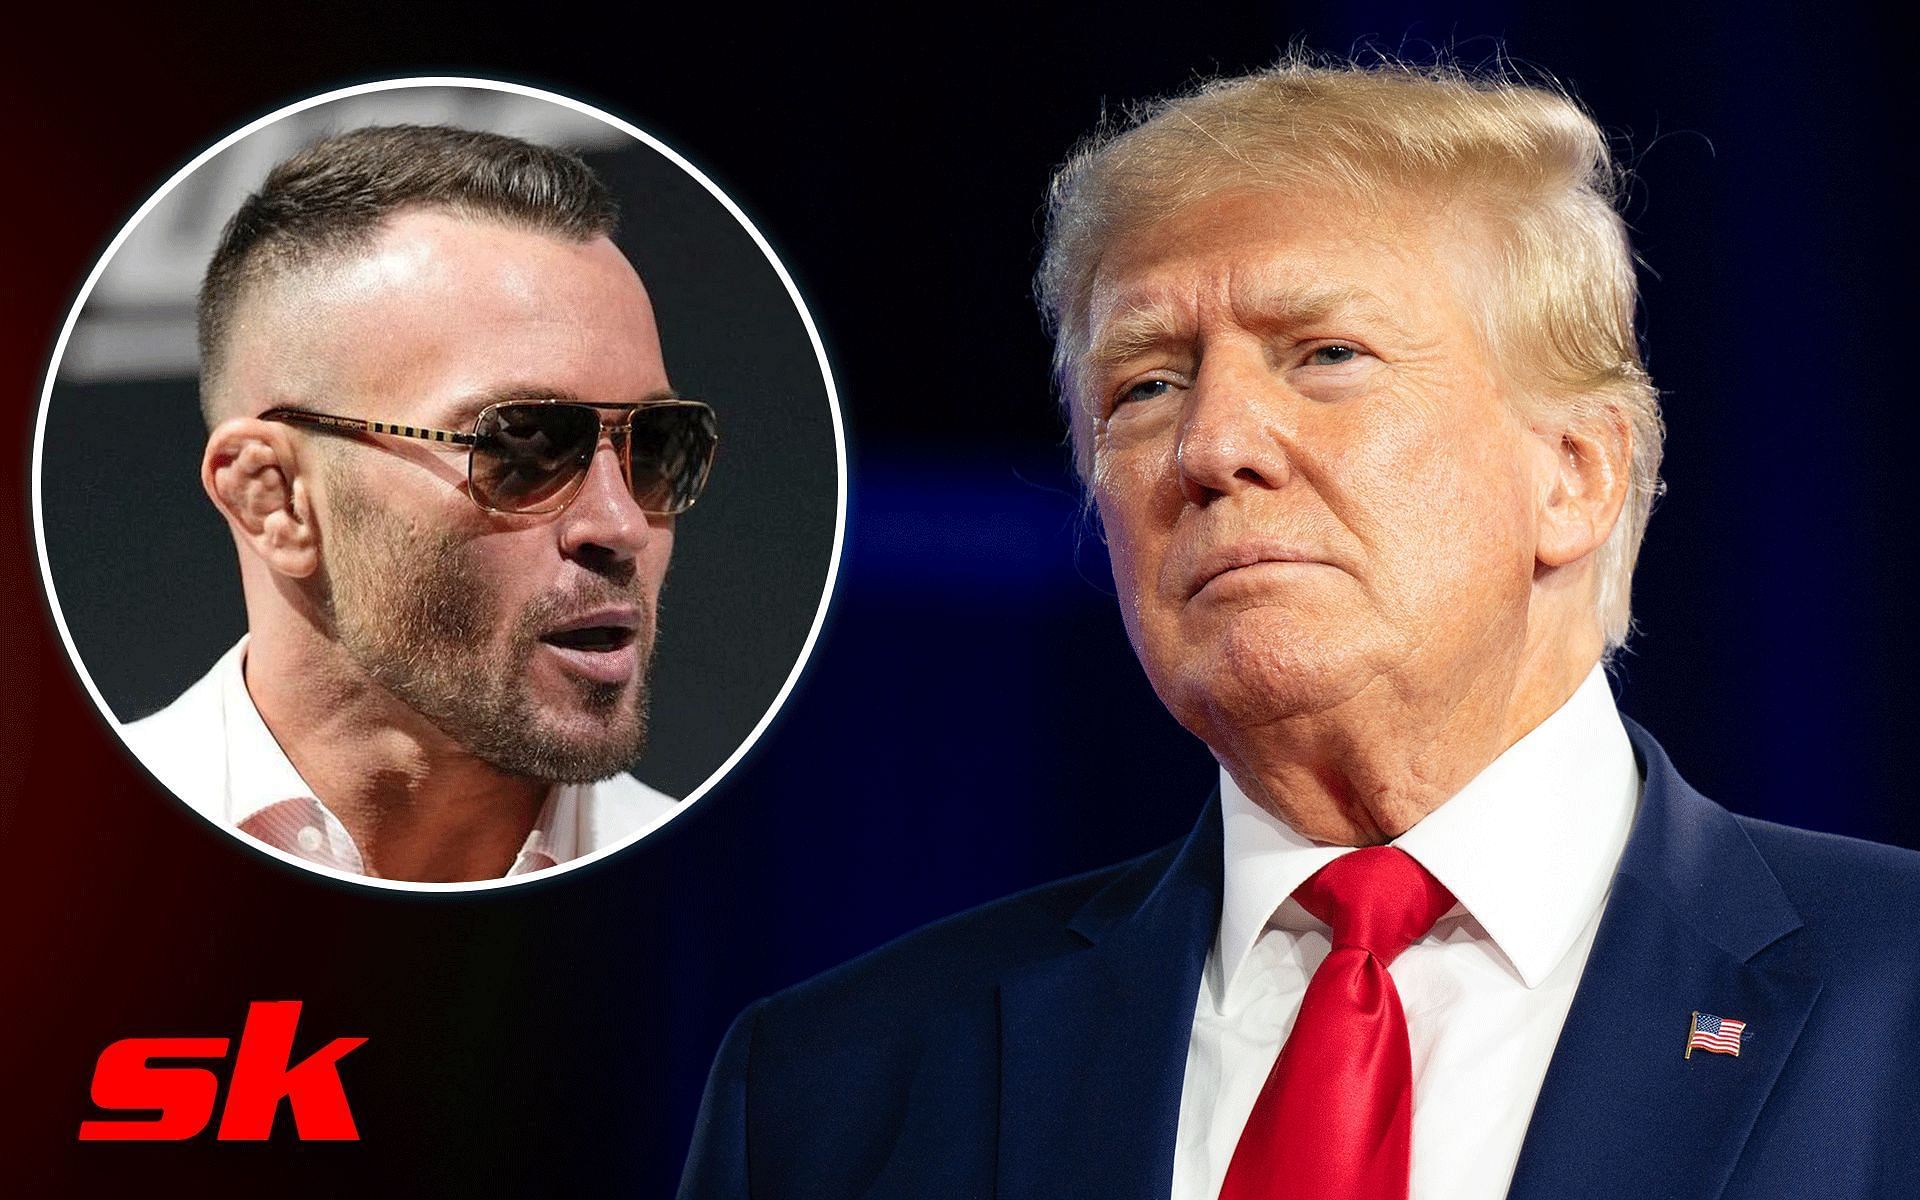 Colby Covington (left) speculates his association with Donald Trump (right) as the reason for his loss [Image courtesy @colbycovington on Instagram and Getty Images]